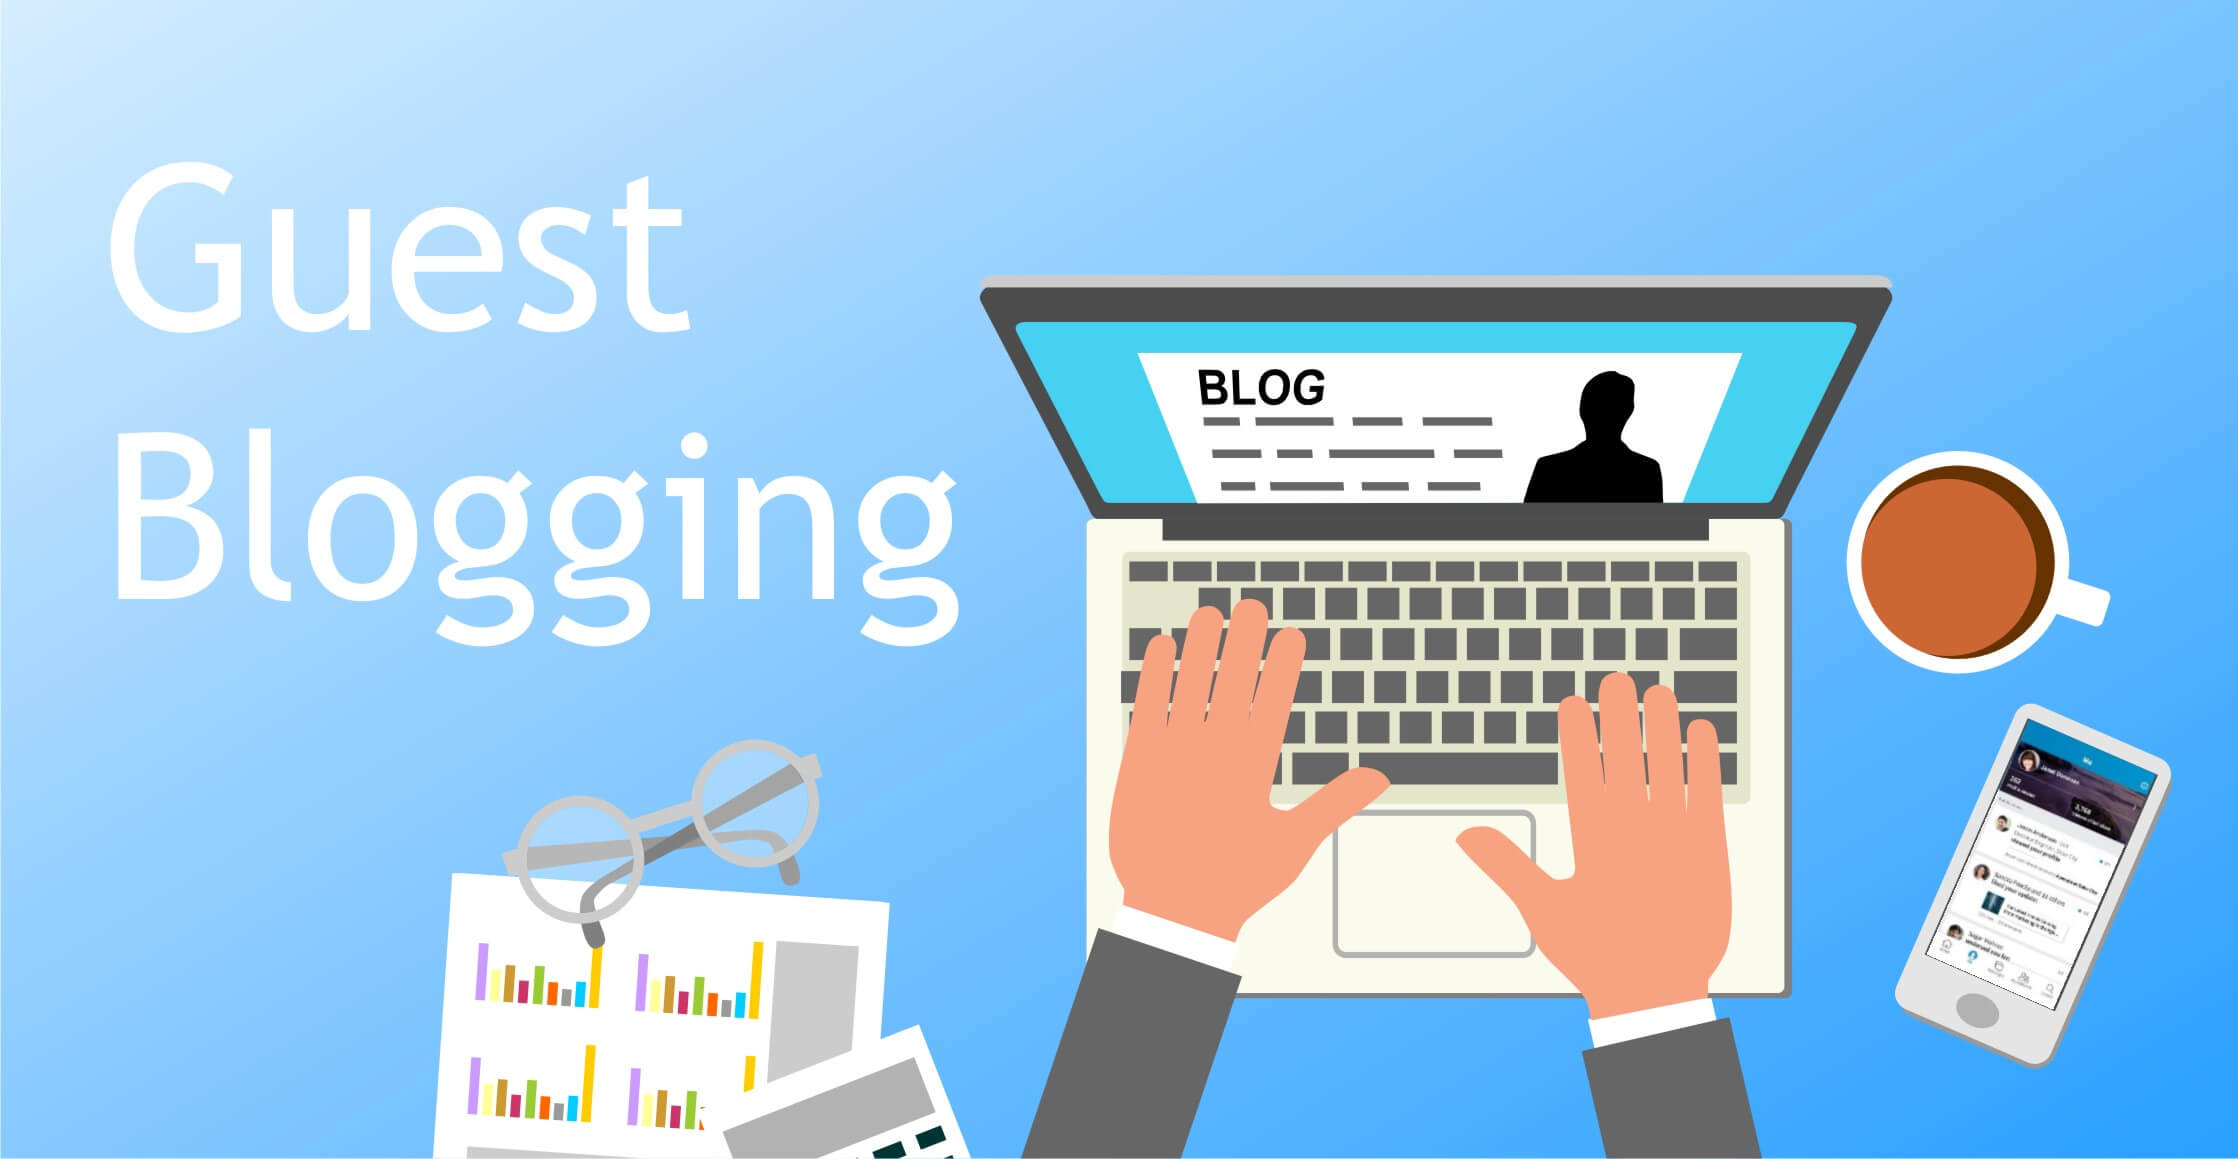 Why is everyone giving more preference to guest blogging services?